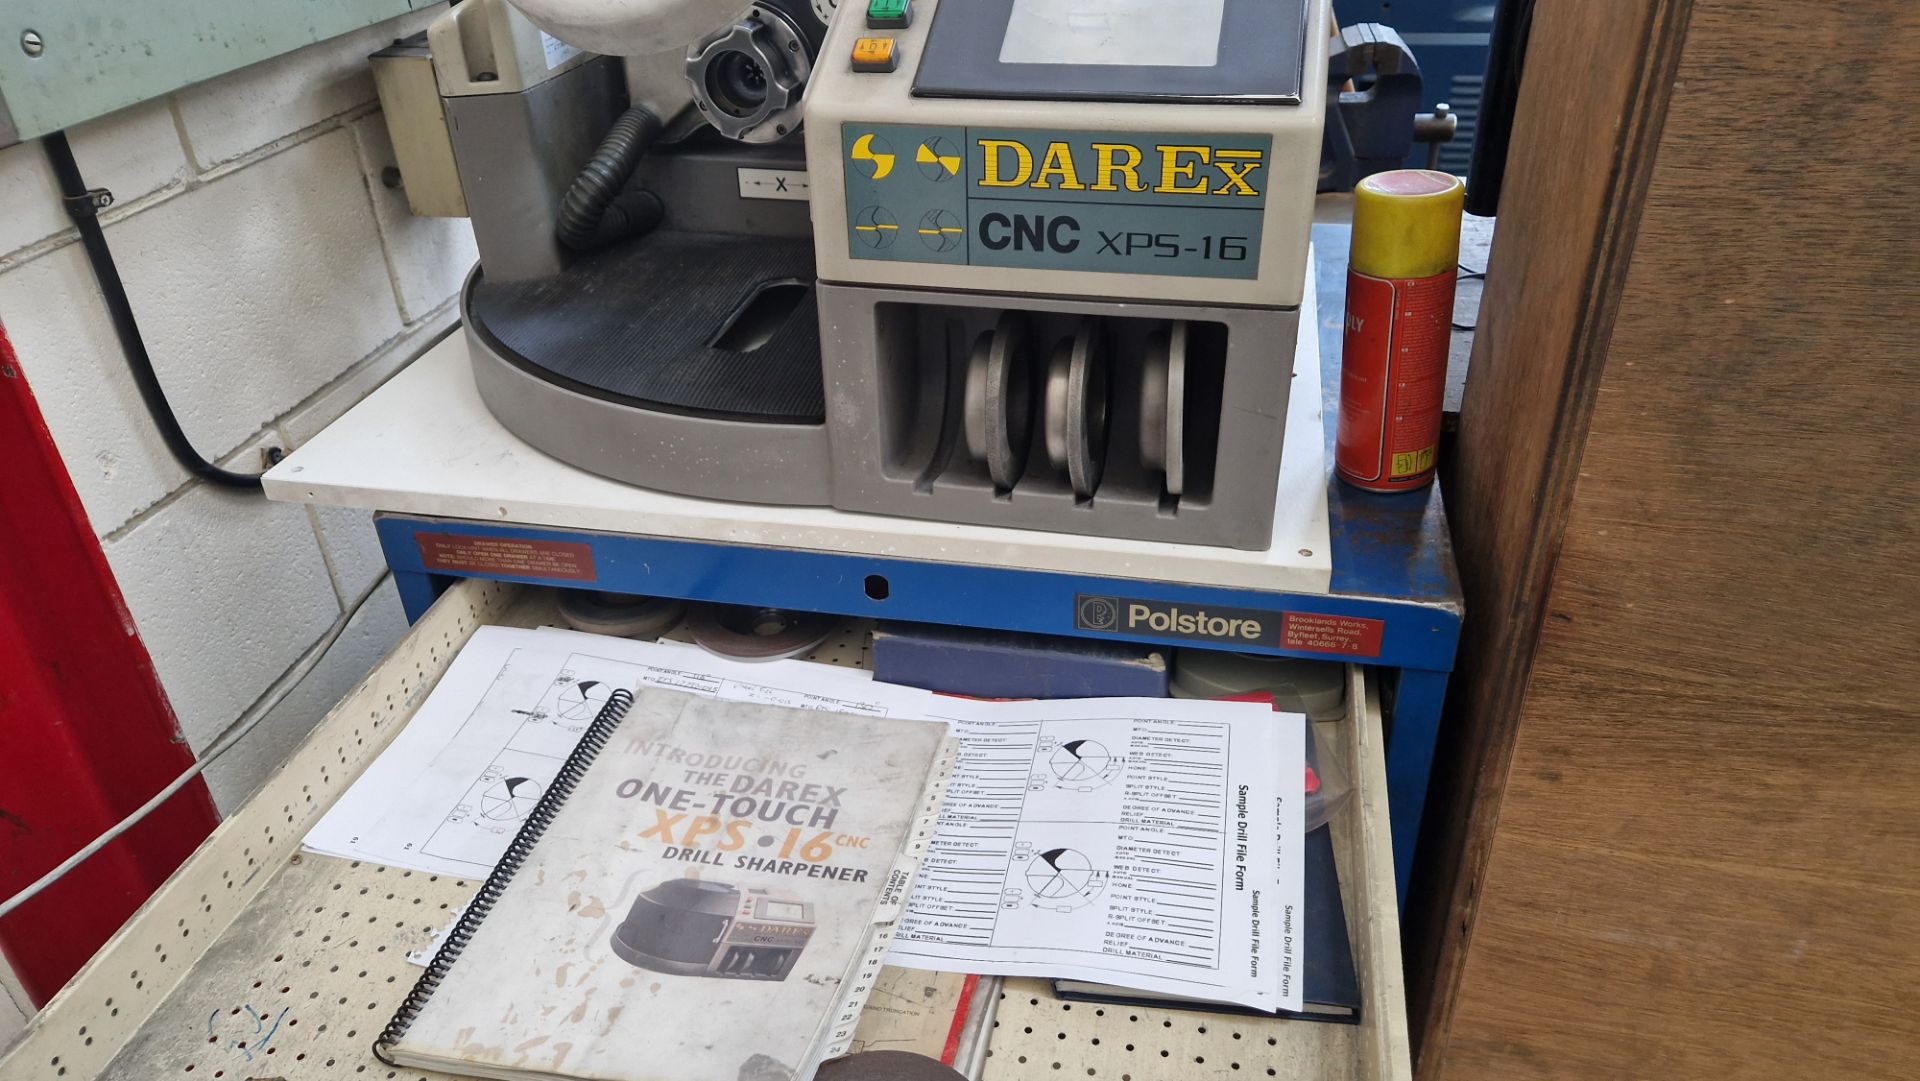 DAREX CNC XPS-16 DRILL SHARPENER WITH MANUALS AND ASSOCAITED SPARES IN POLSTORE TOOL CHEST - Image 2 of 5